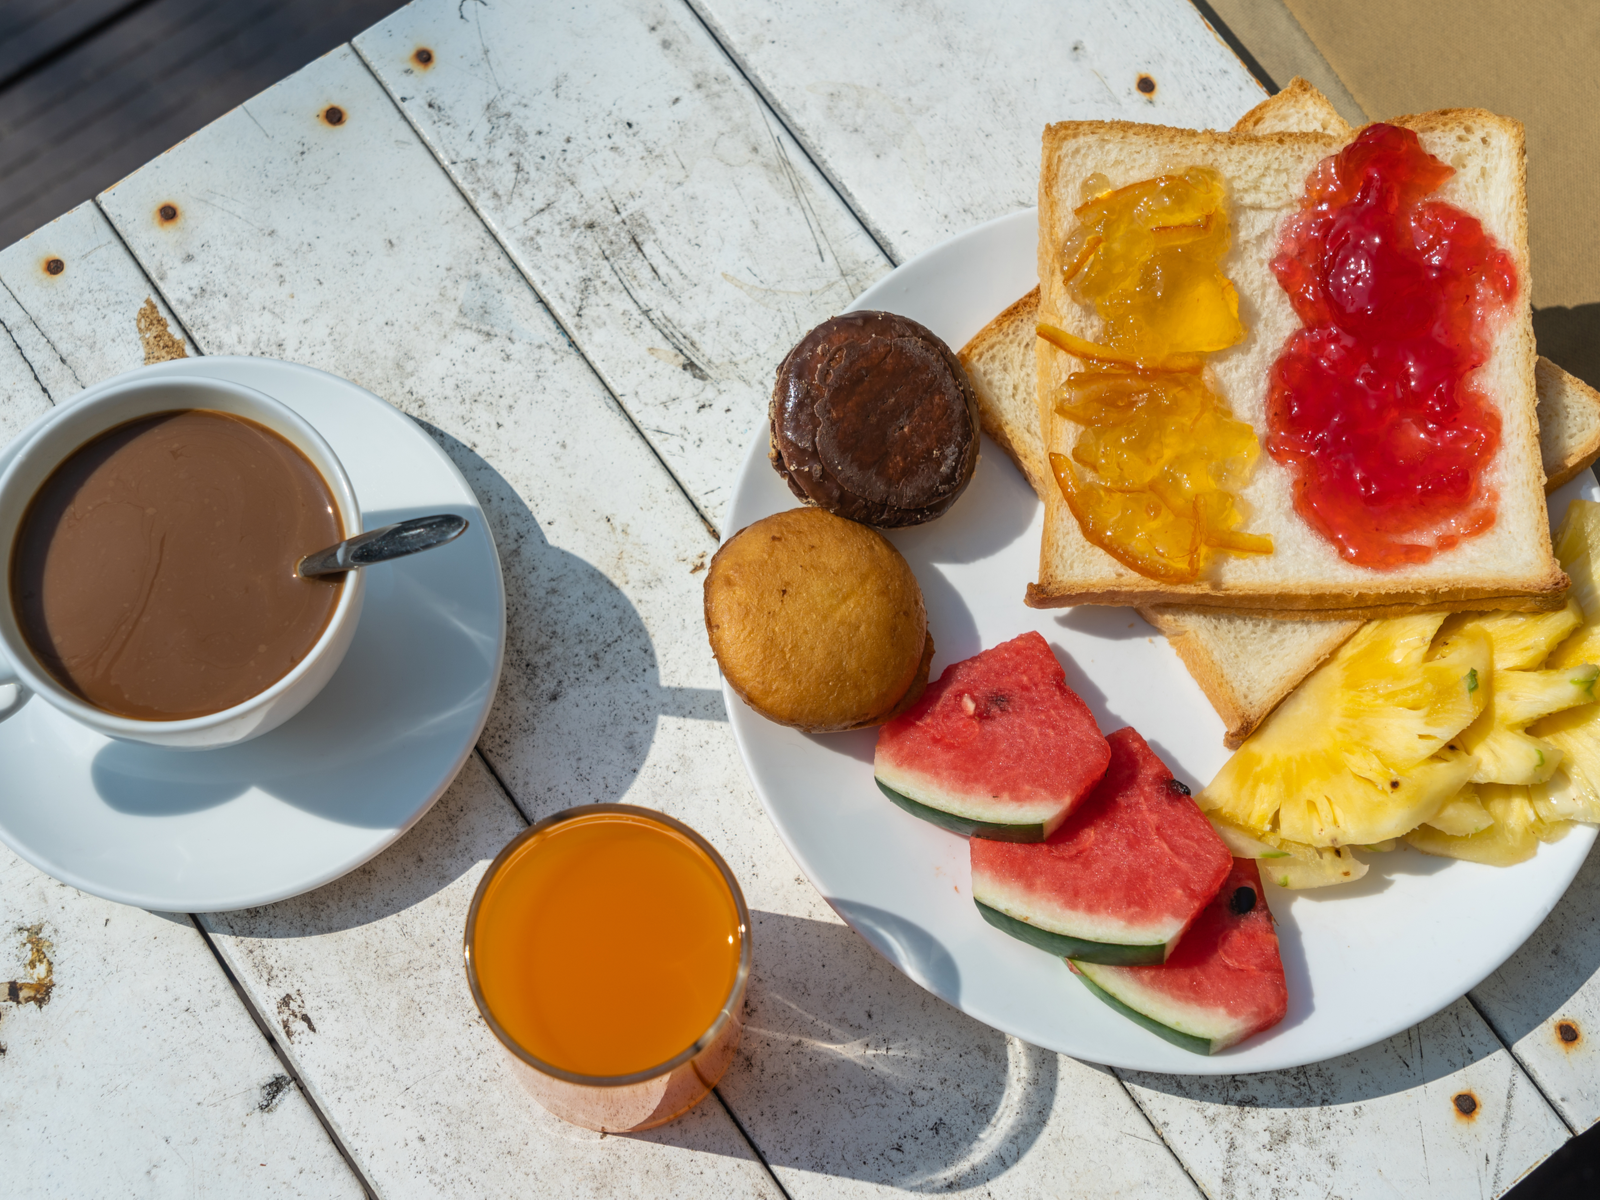 A breakfast serving at the Manatee Palms in Florida, one of the best all-inclusive resorts in the U.S., with watermelon, pineapple, bread with jam, juice and coffee 